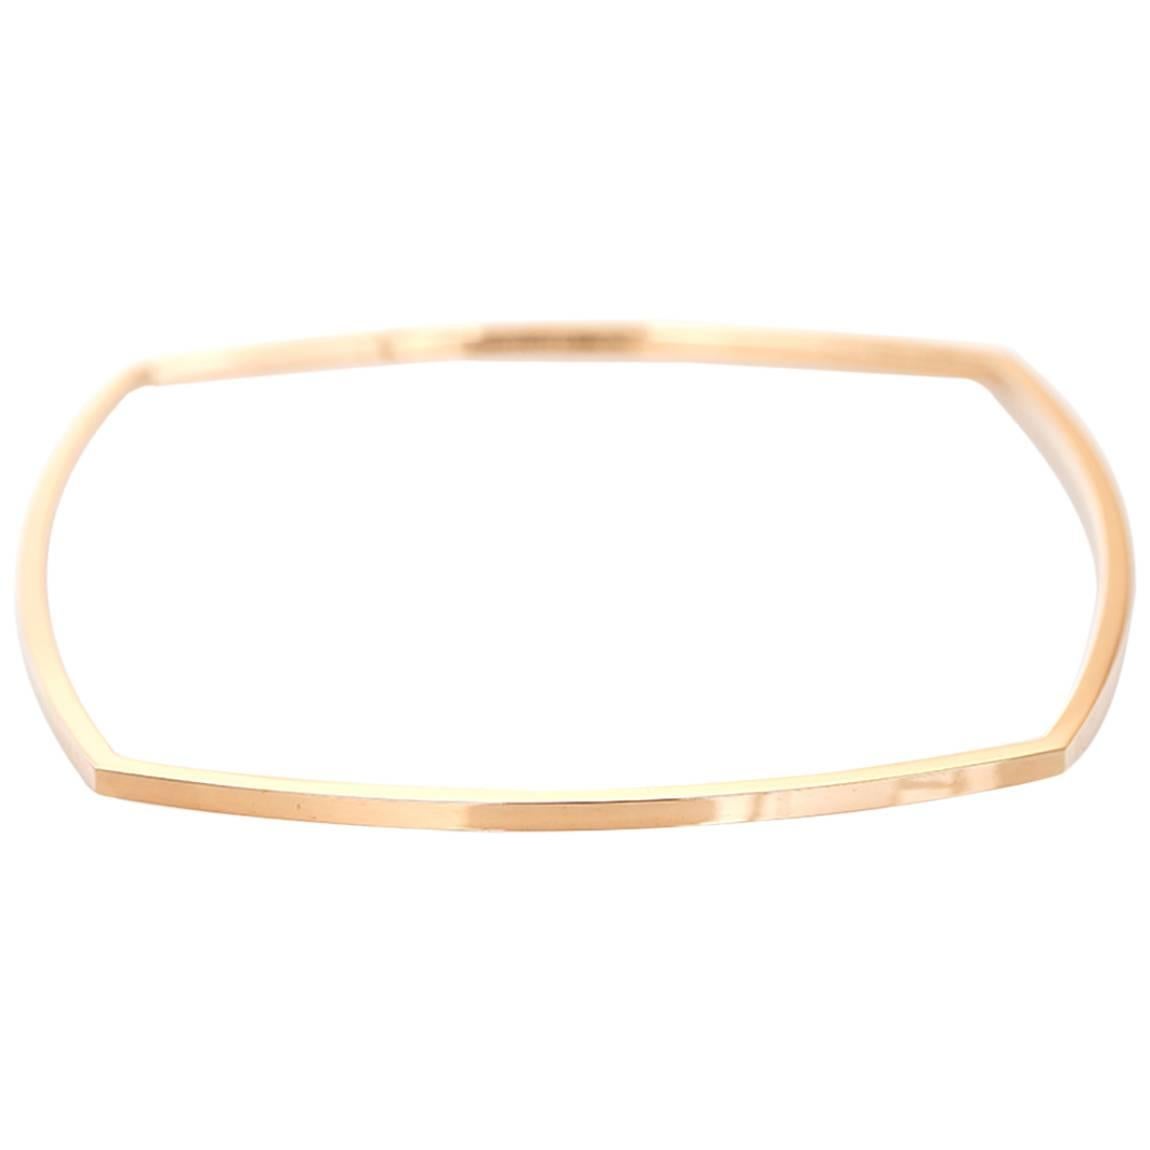  Tiffany & Co. Frank Gehry Torque Micro Rose Gold Bangle Bracelet